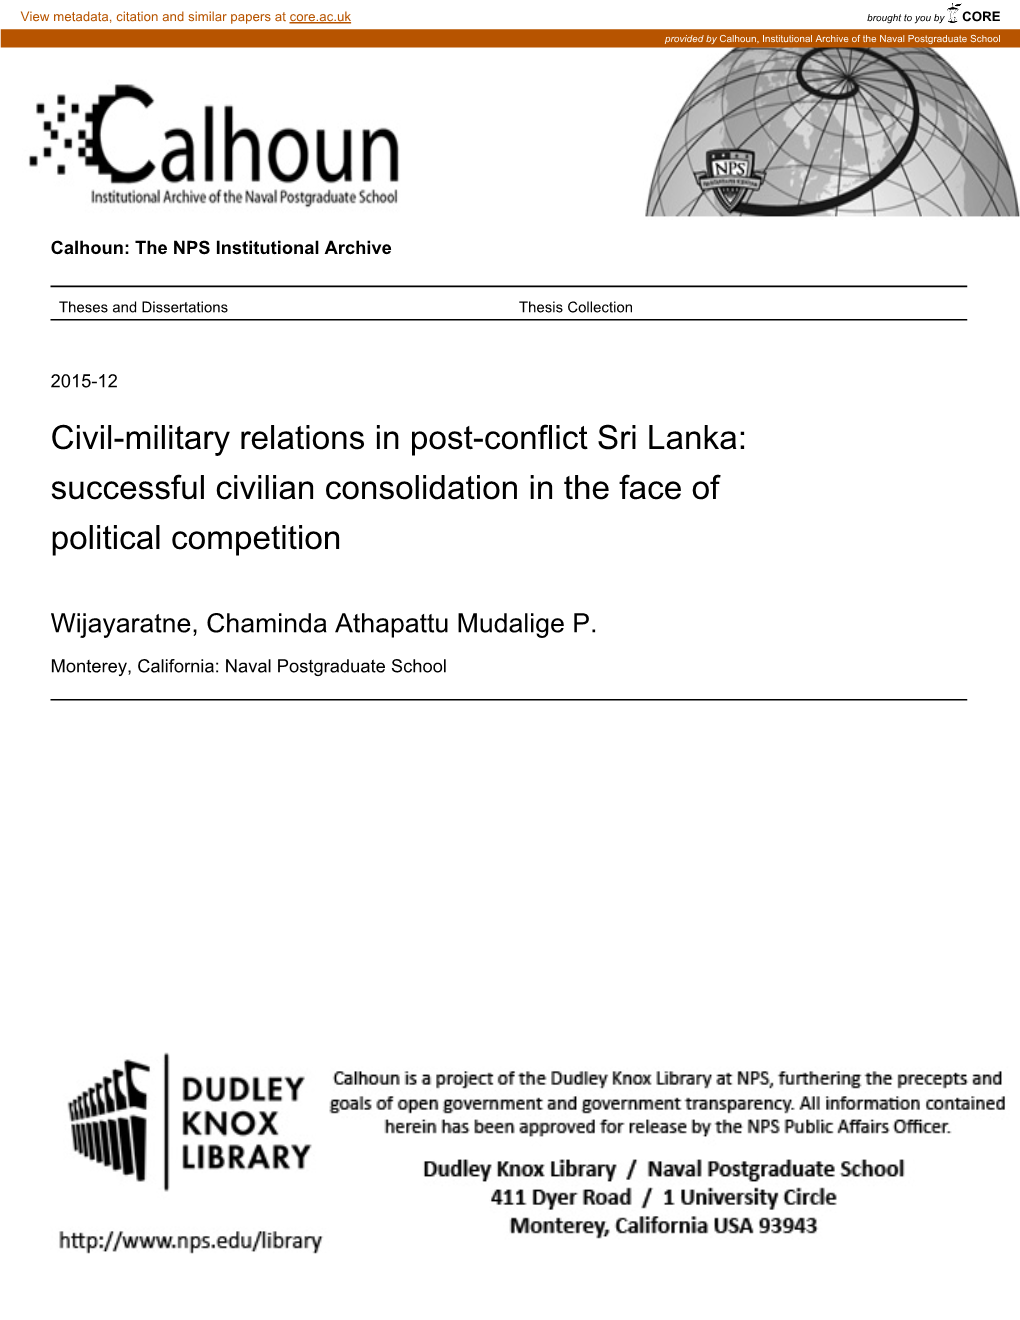 Civil-Military Relations in Post-Conflict Sri Lanka: Successful Civilian Consolidation in the Face of Political Competition